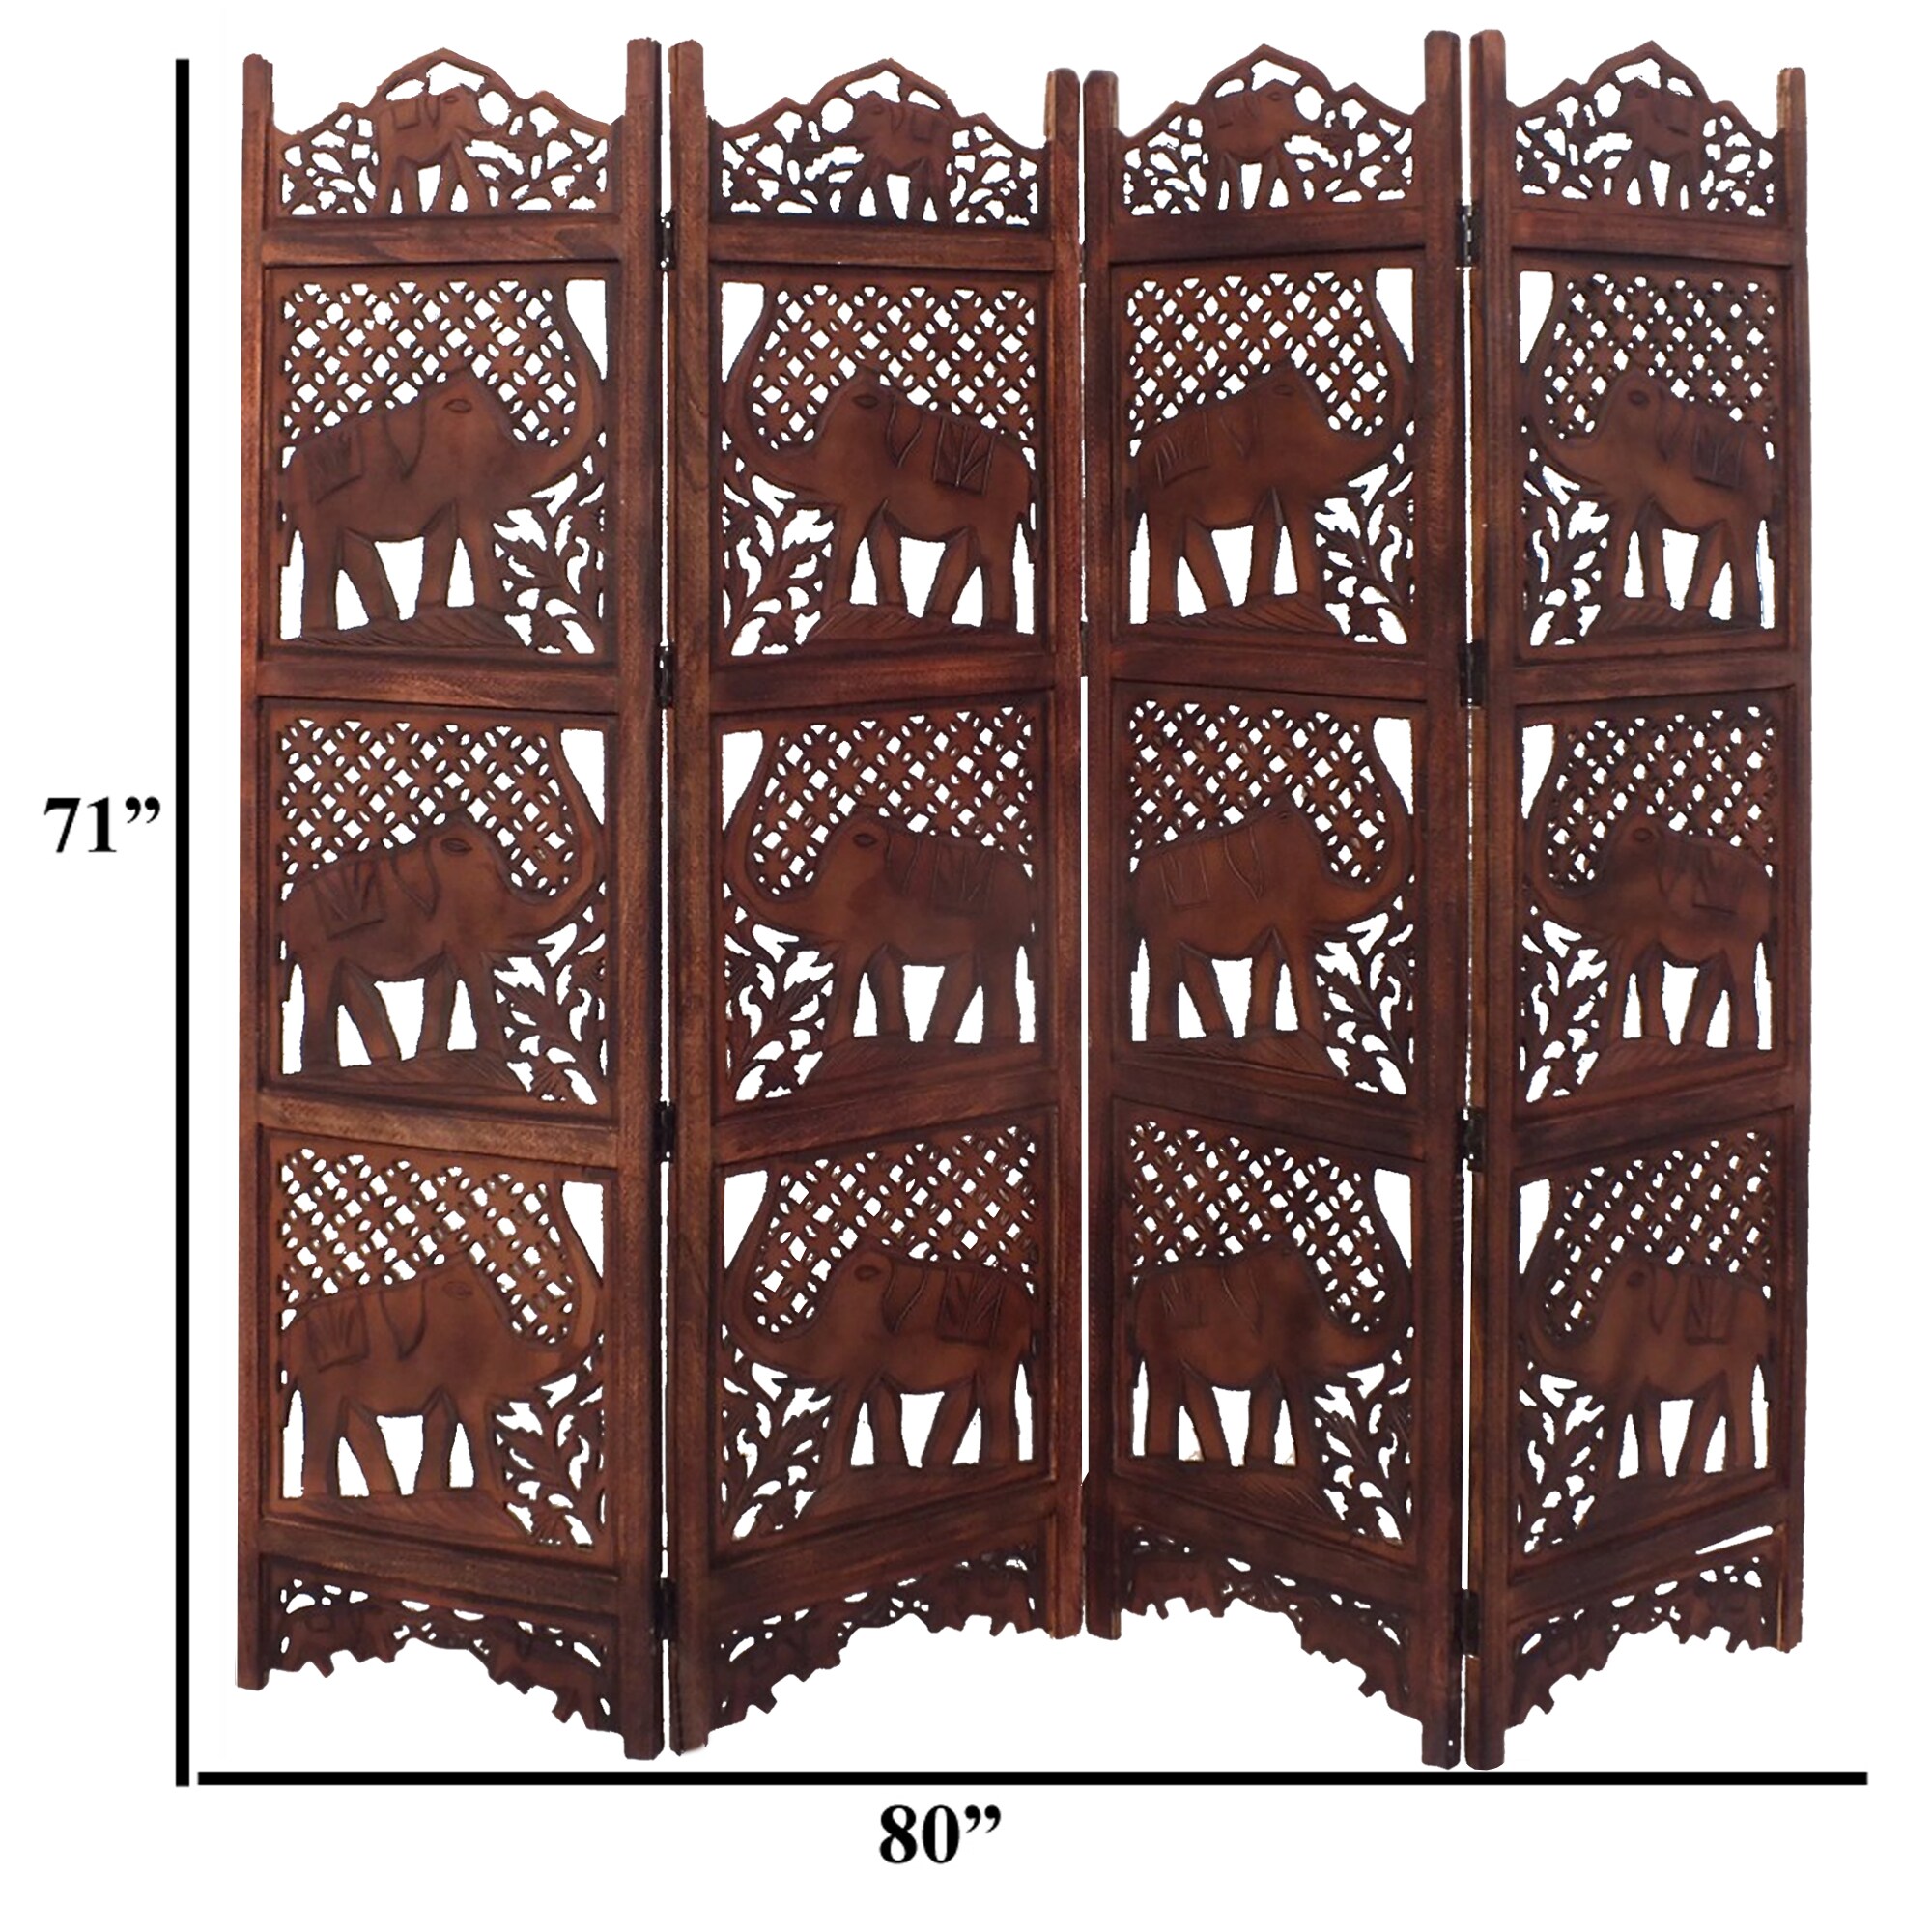 Dark Brown 4 P Leather & Wood Screen Room Divider w/ Tan Diamond Shape Accents 